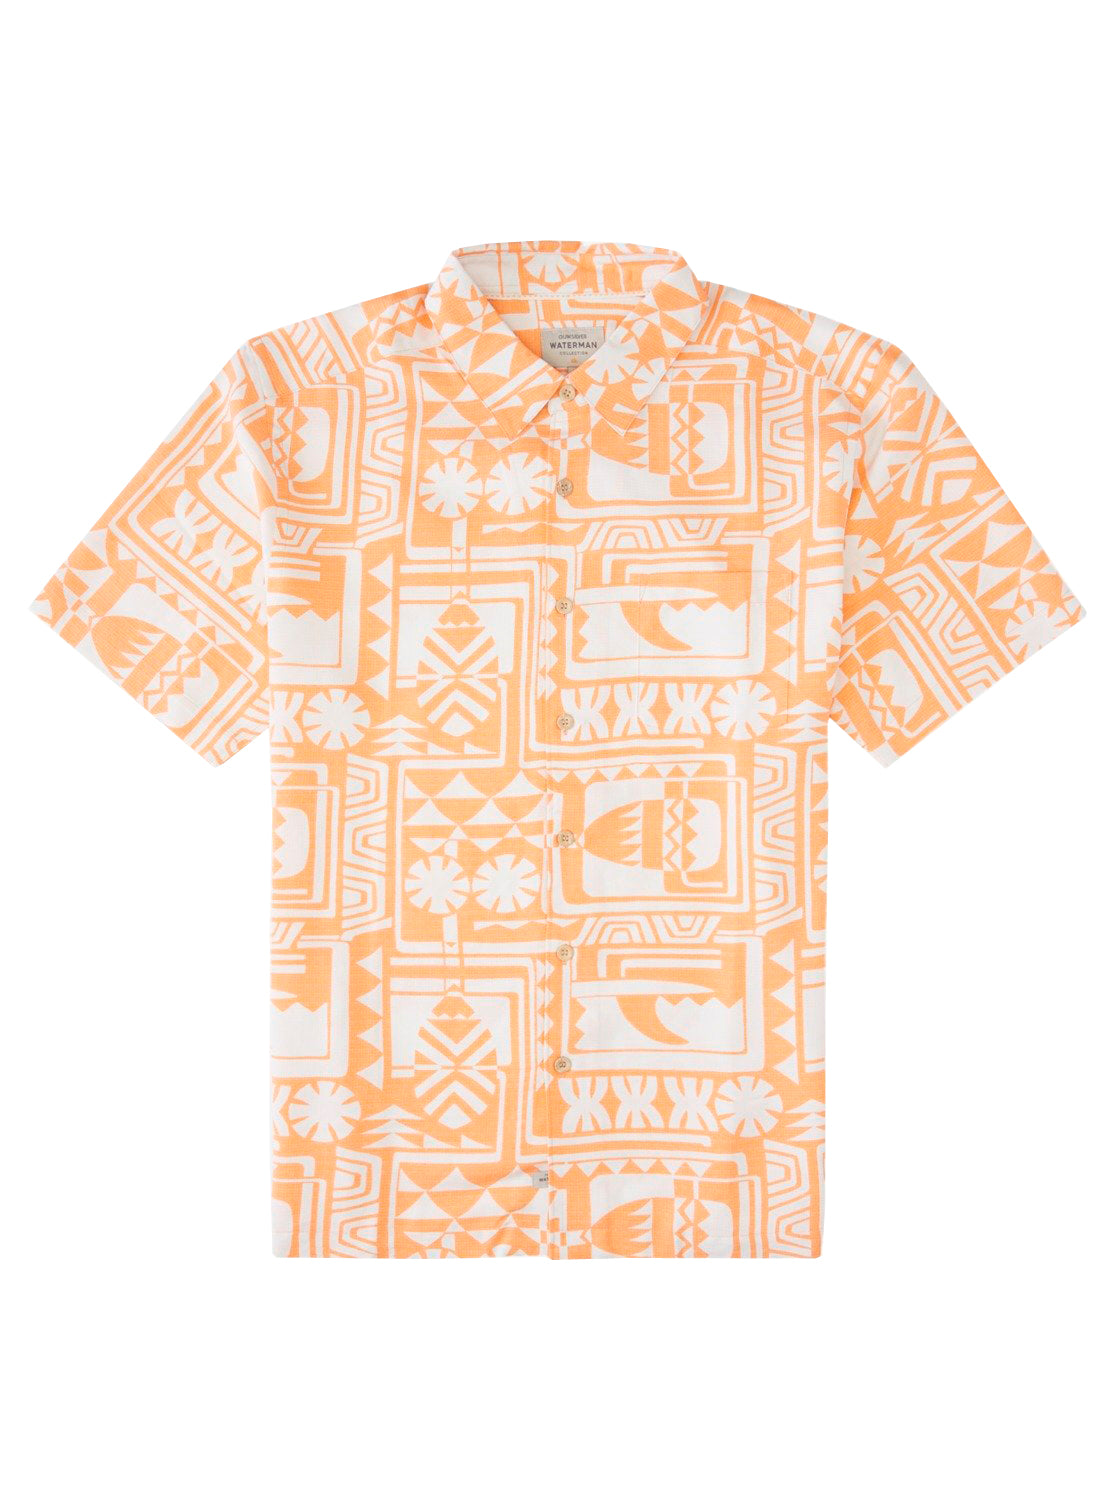 Quiksilver Waterman Dogpatch Vibes Woven MGE6 XL